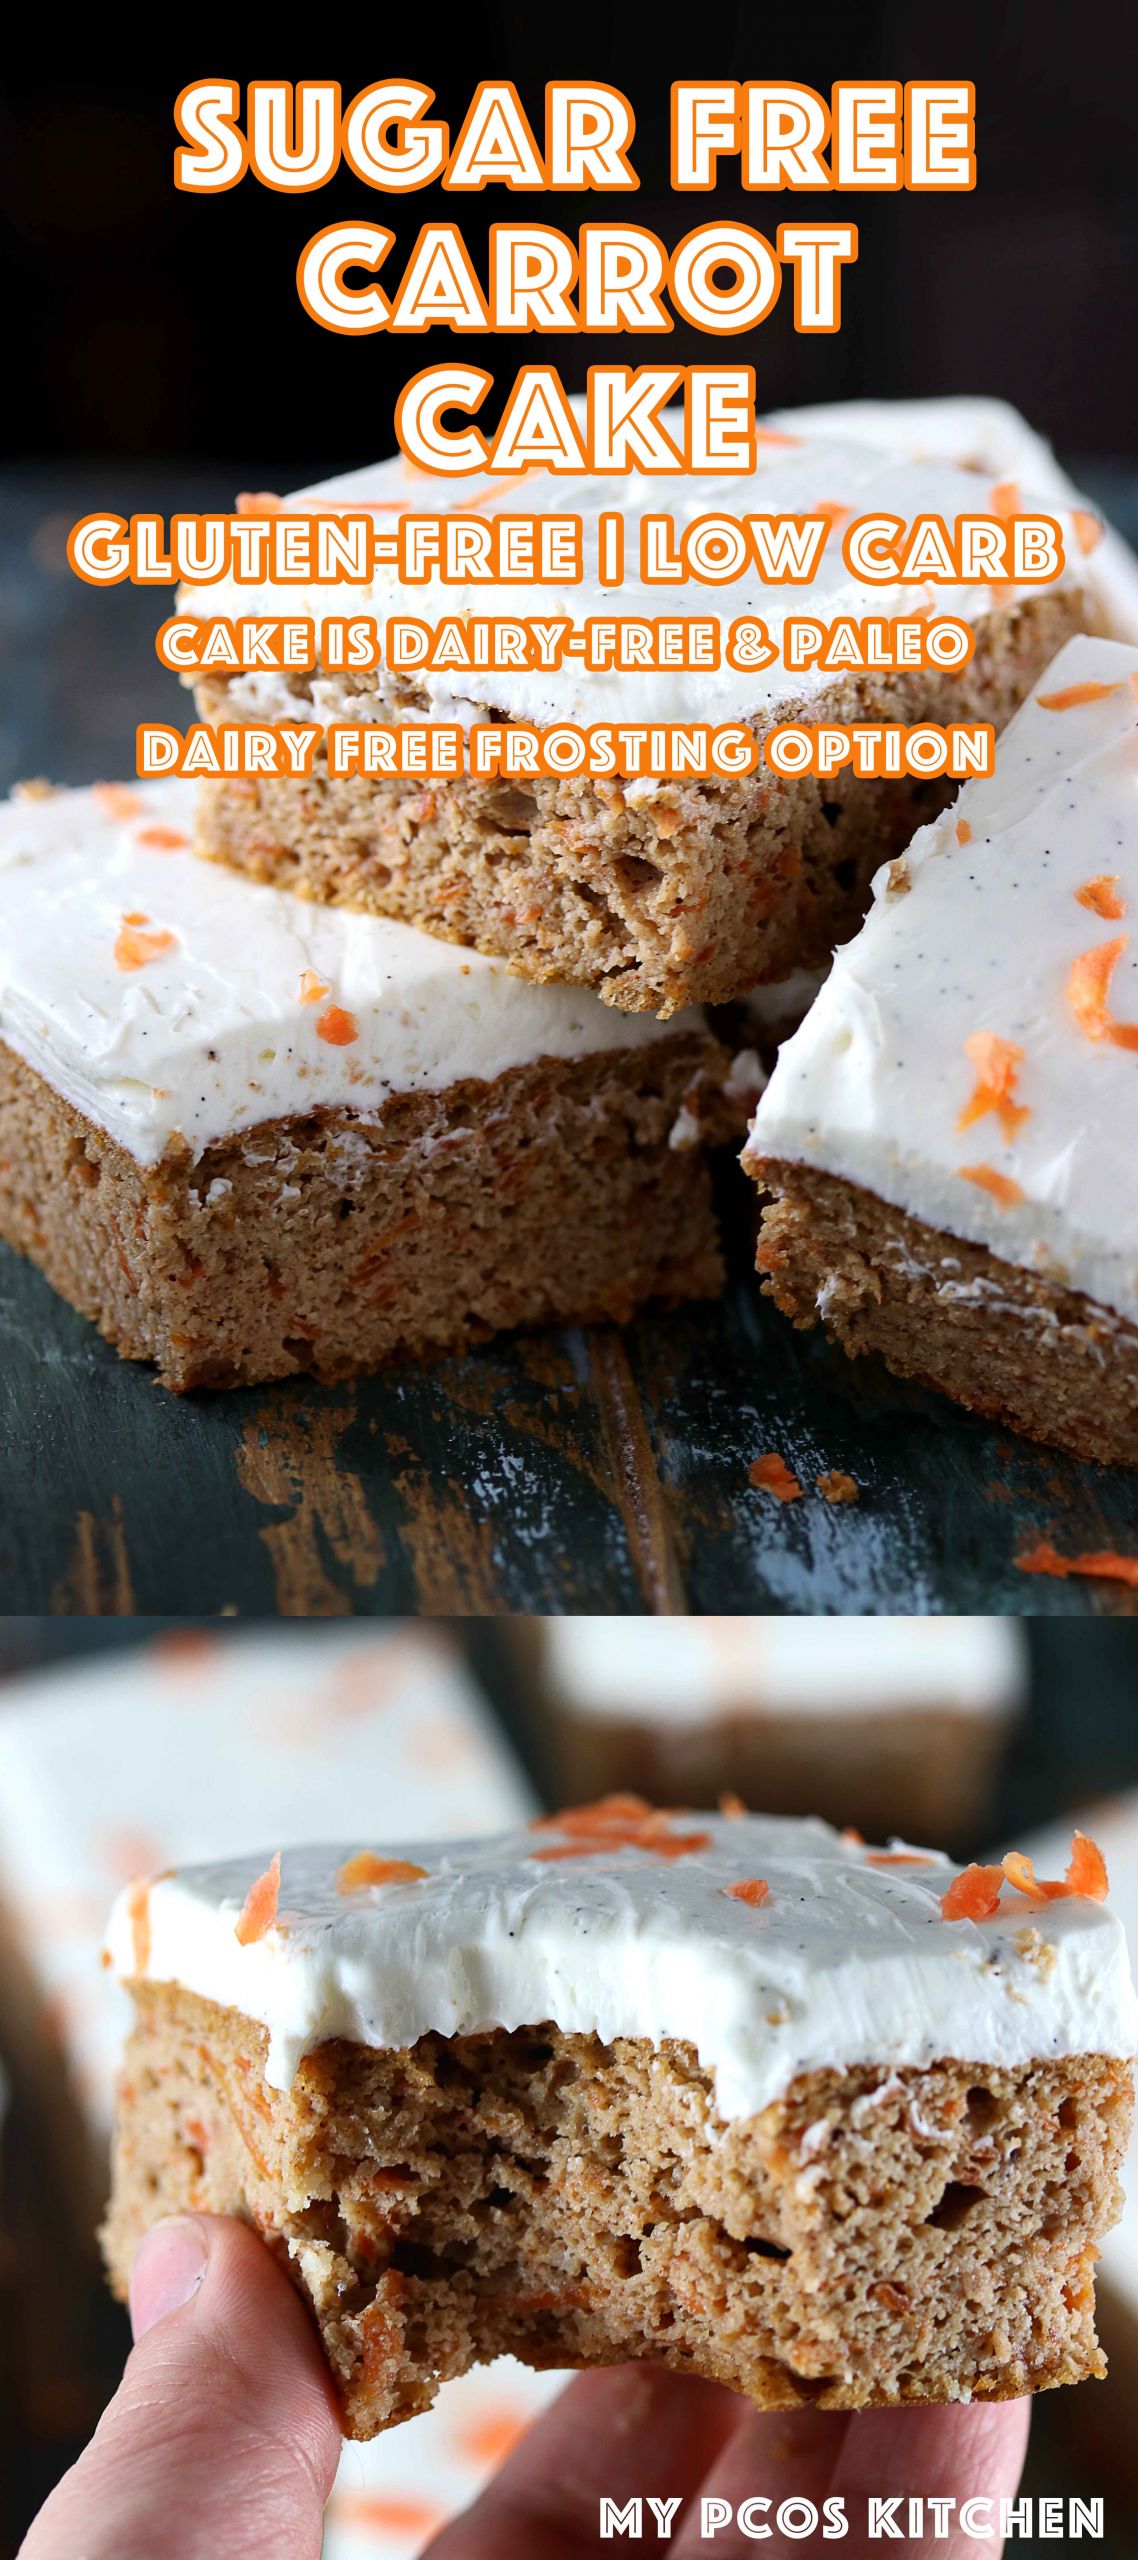 Low Calorie Carrot Cake Recipe
 Low Carb Keto Sugar Free Carrot Cake My PCOS Kitchen